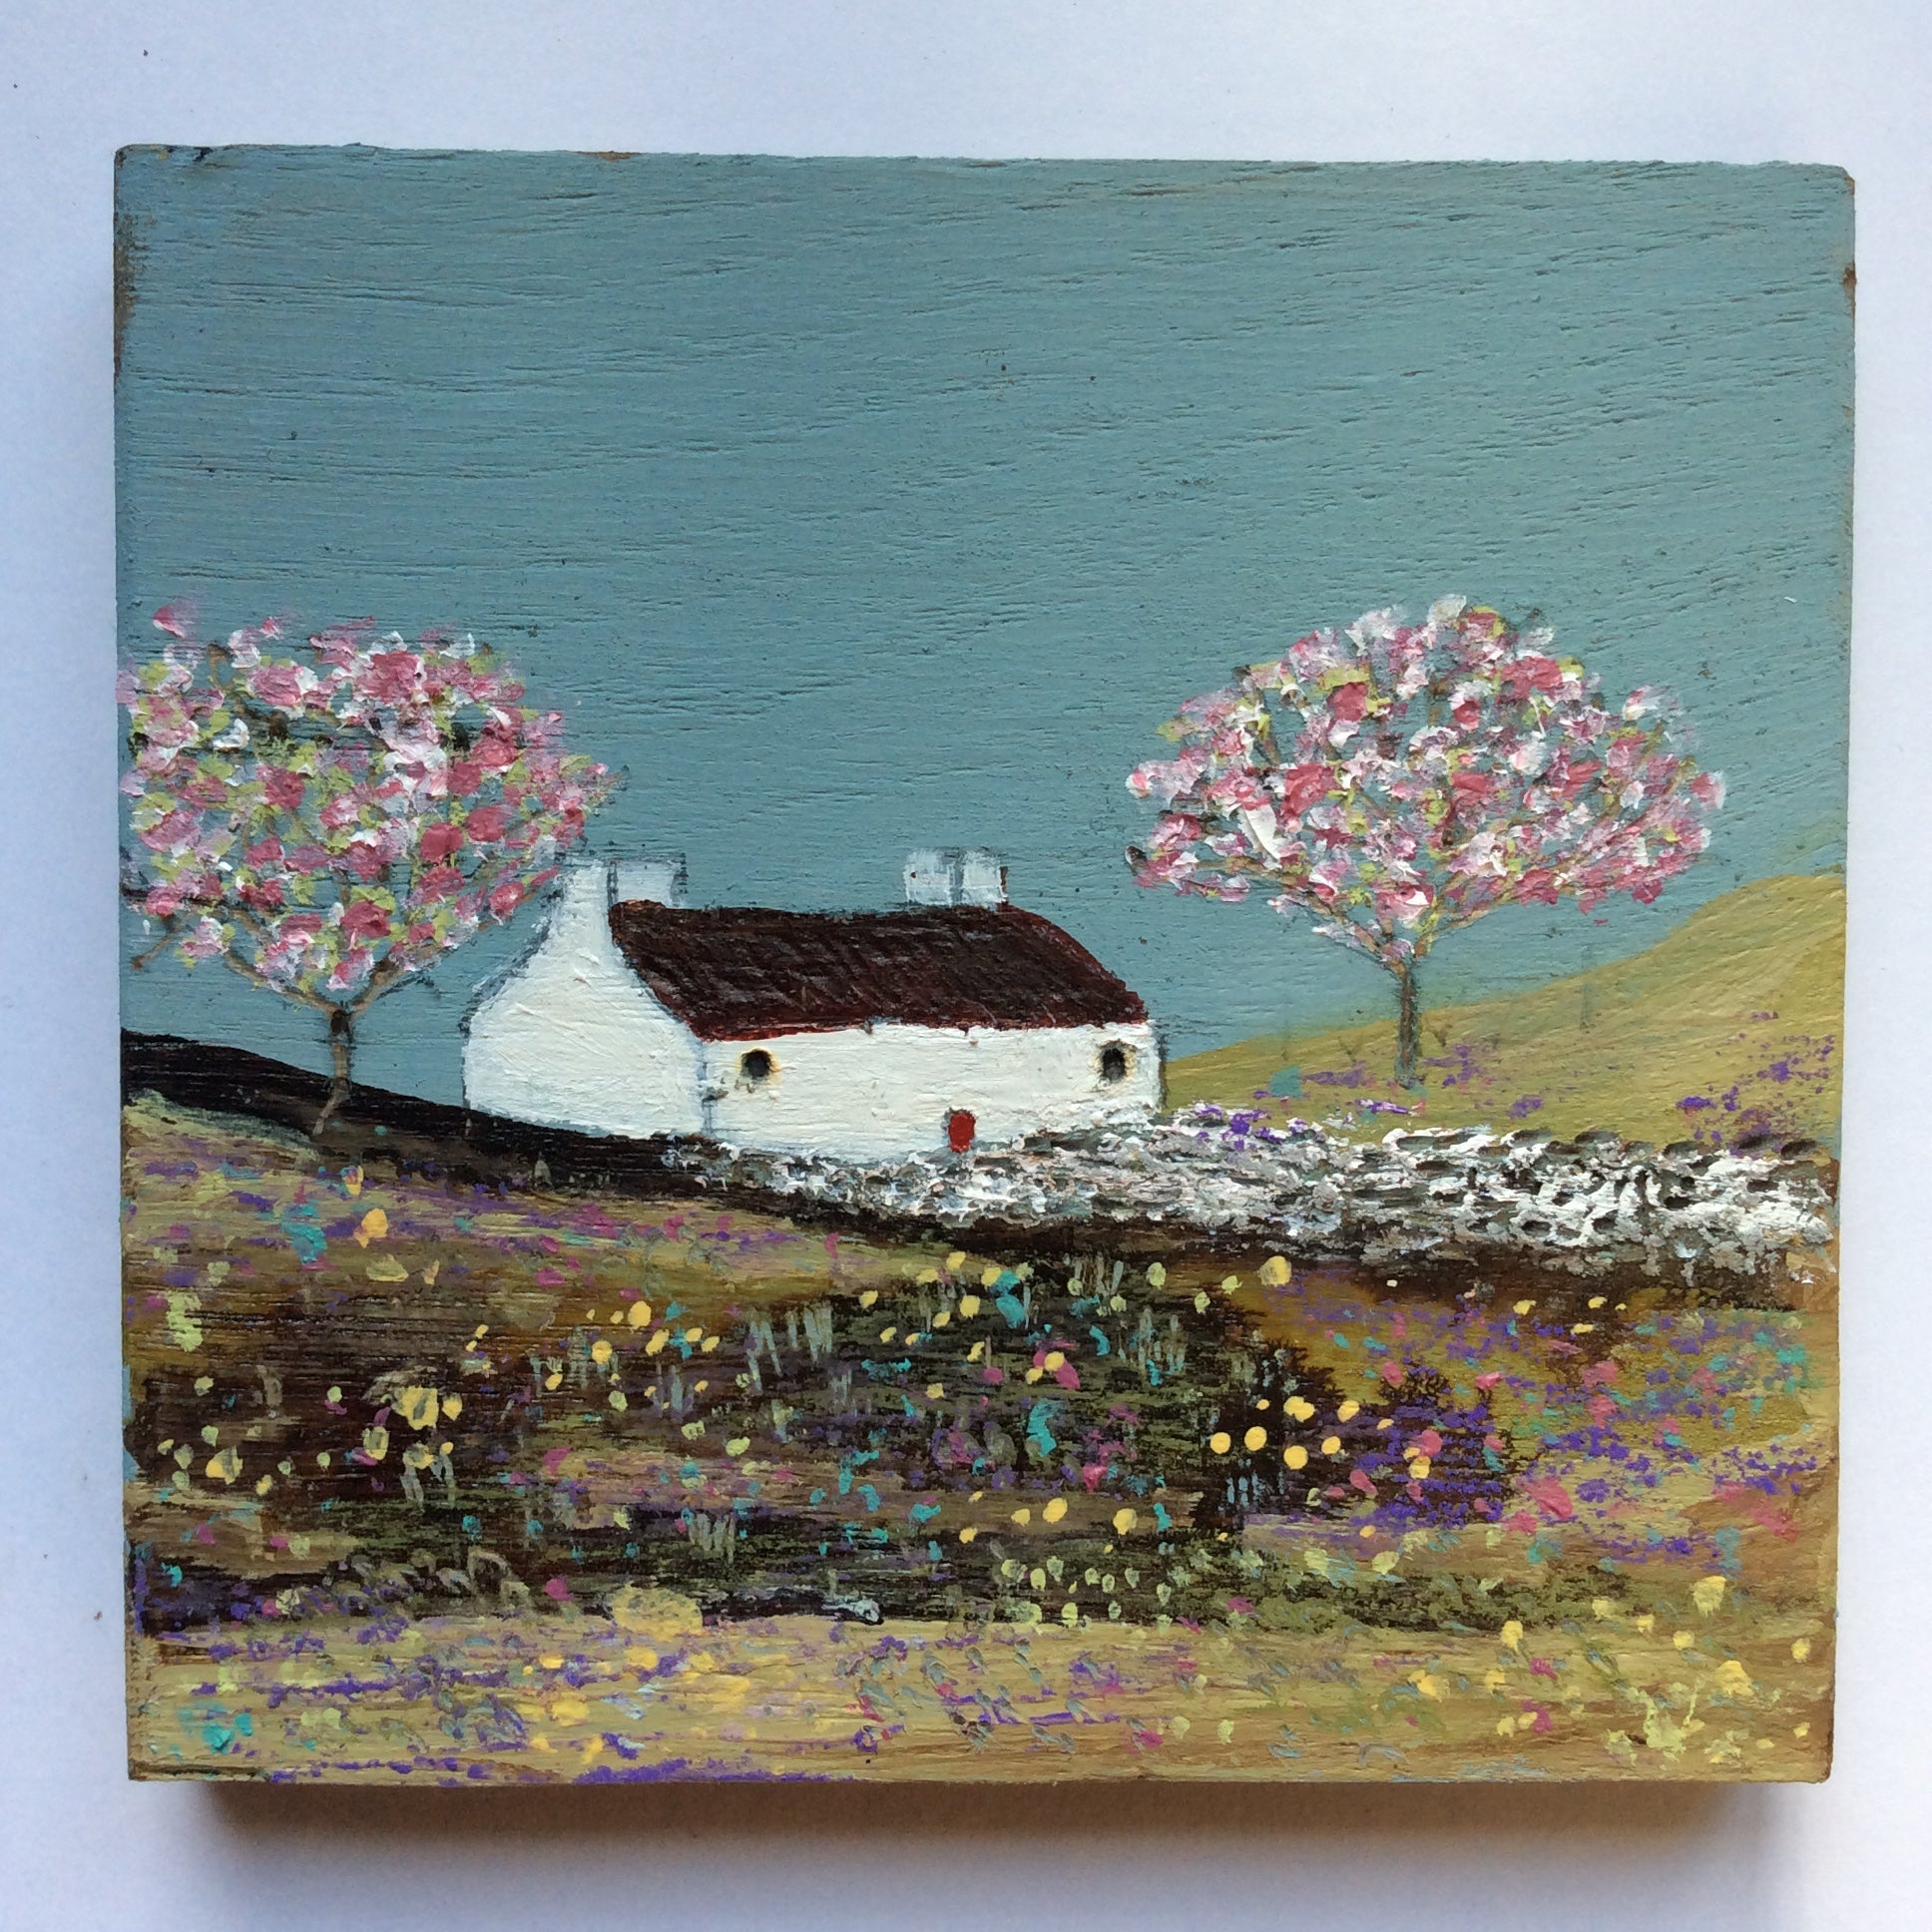 Mini Mixed Media Art on wood By Louise O'Hara - "A mid summer meadow”